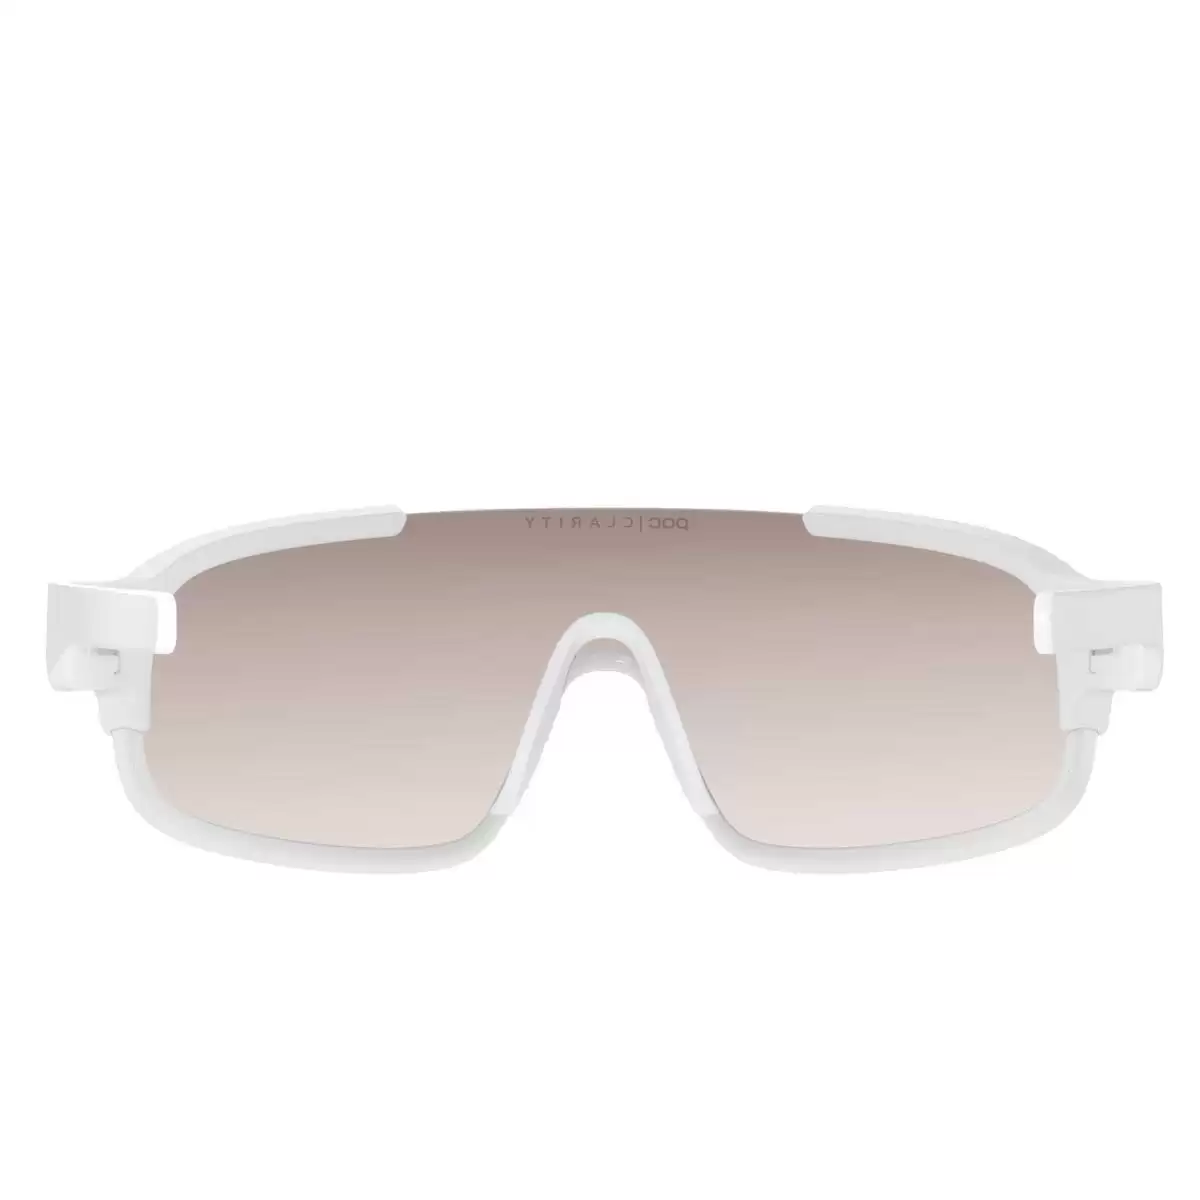 Crave sunglasses white clarity lens Brown #2